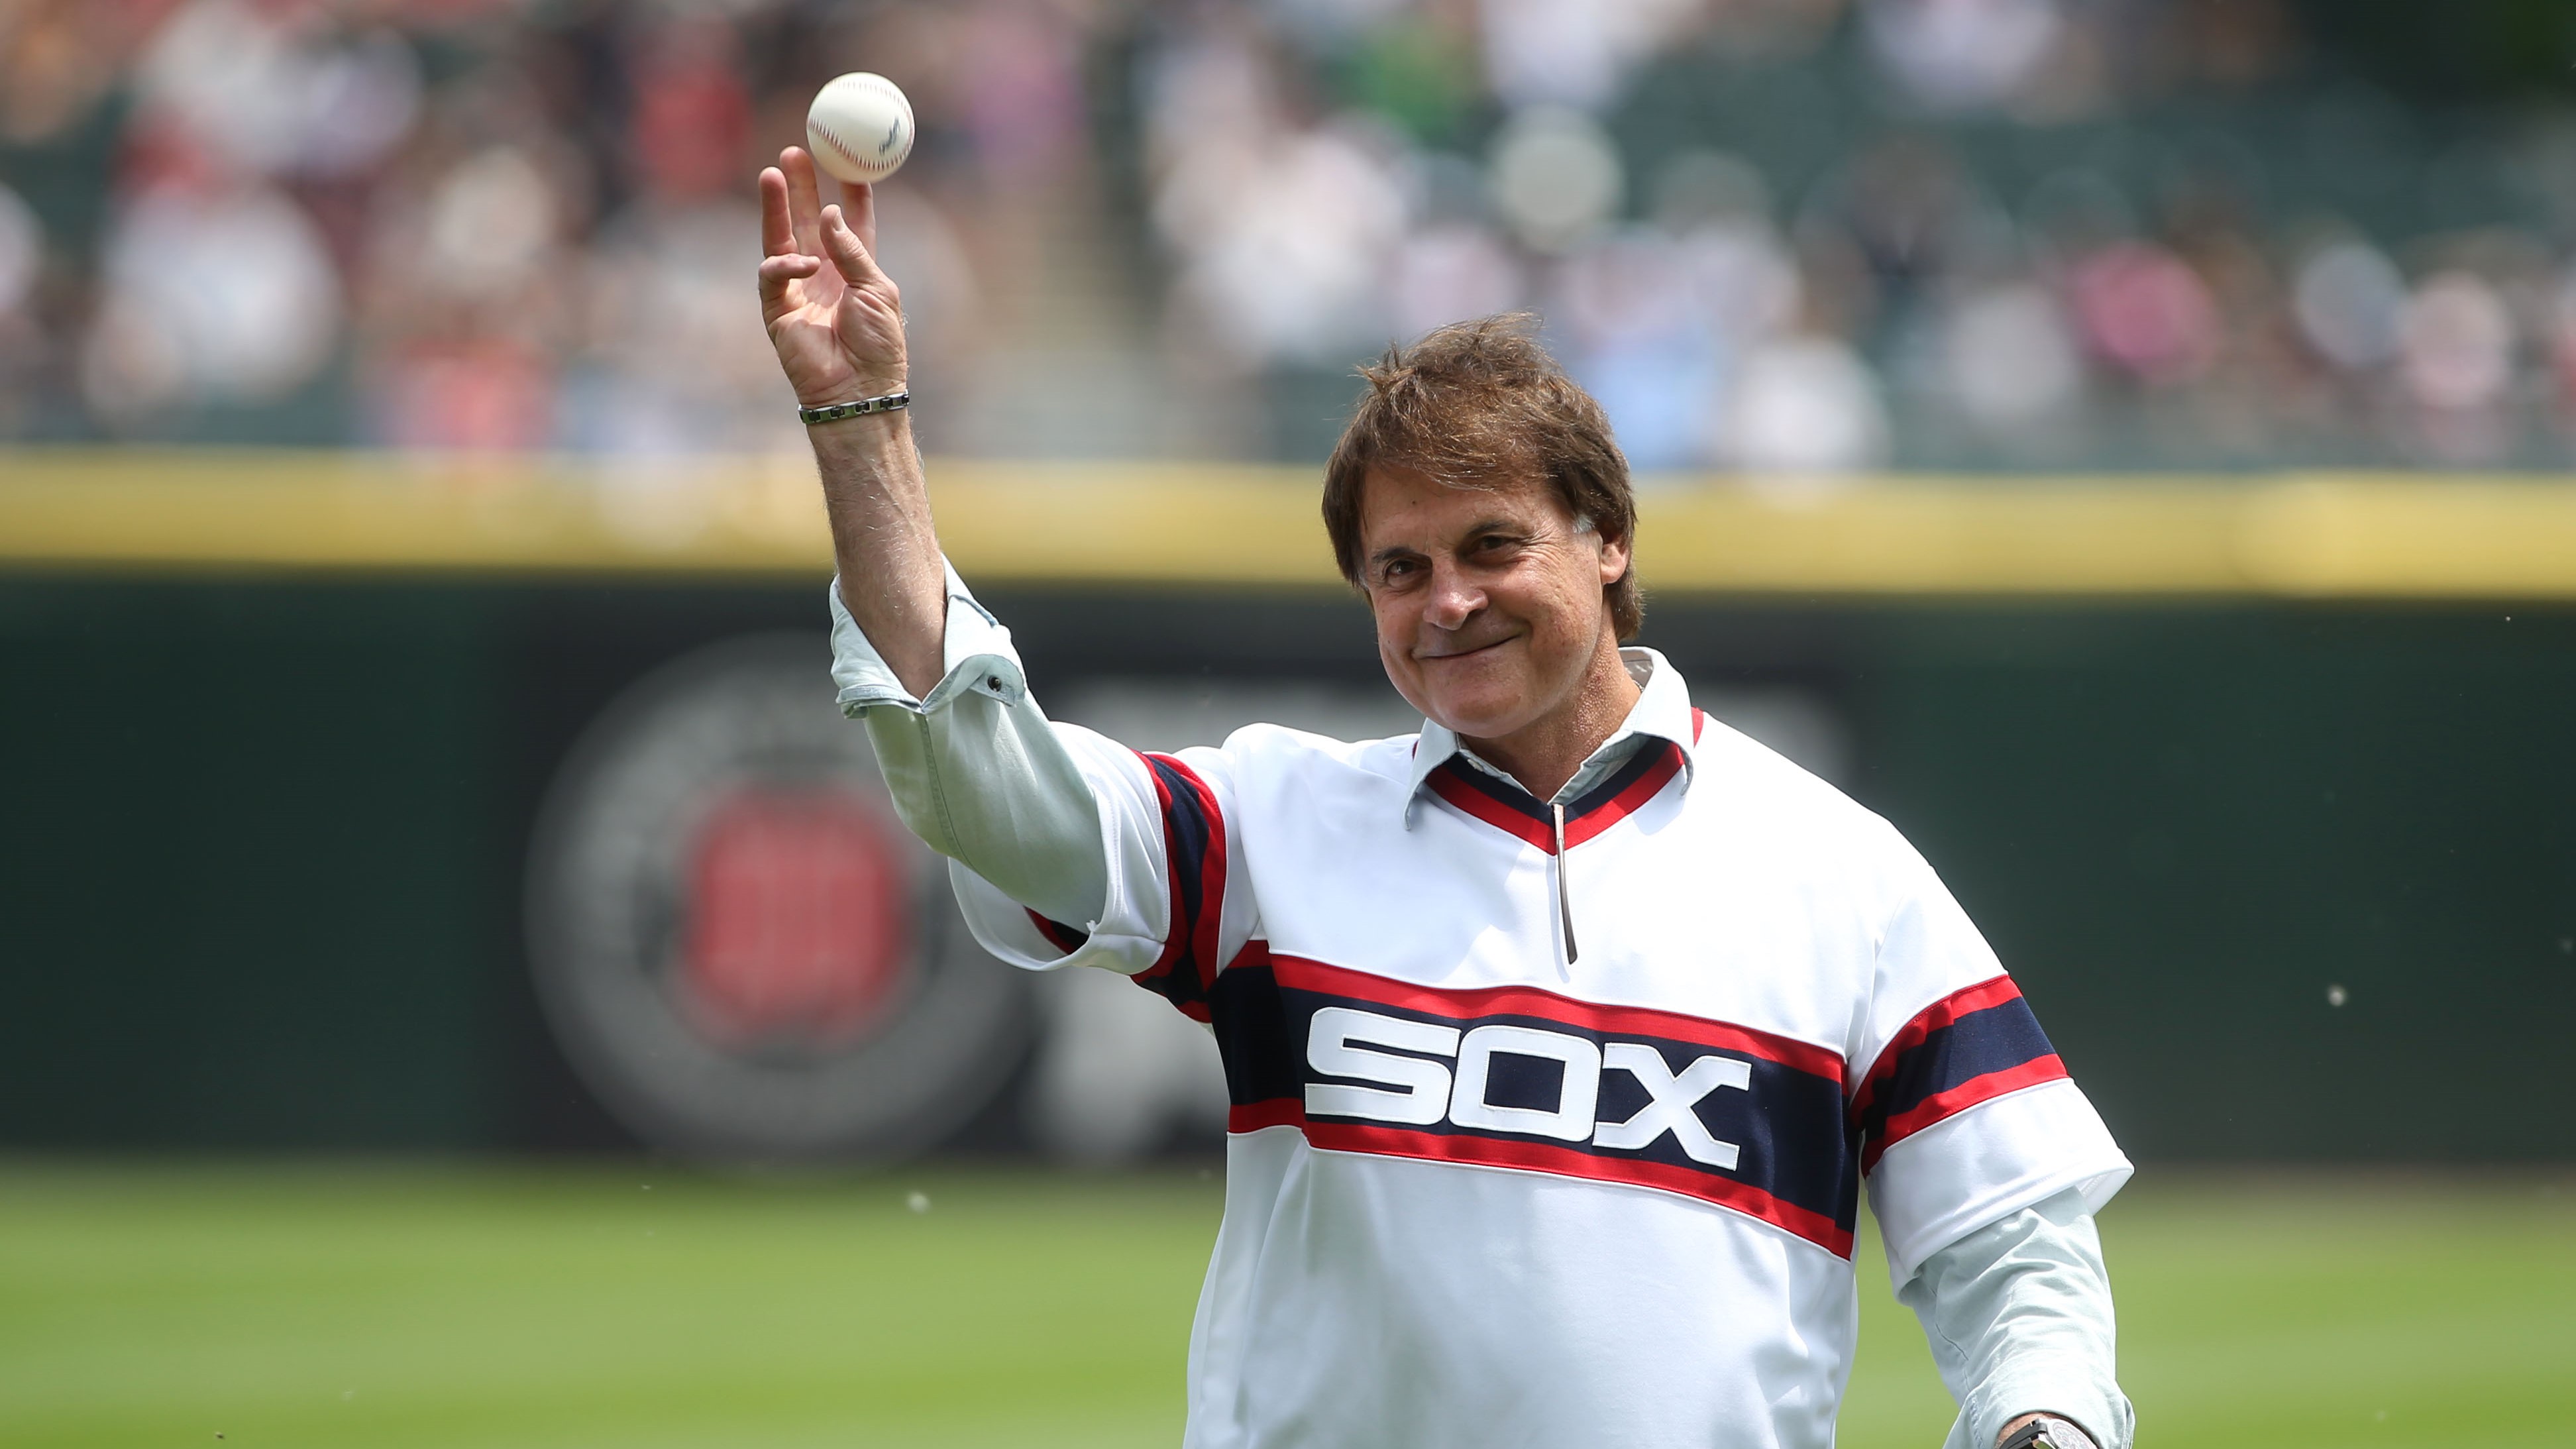 MLB roundup: La Russa moves into second place on career wins list